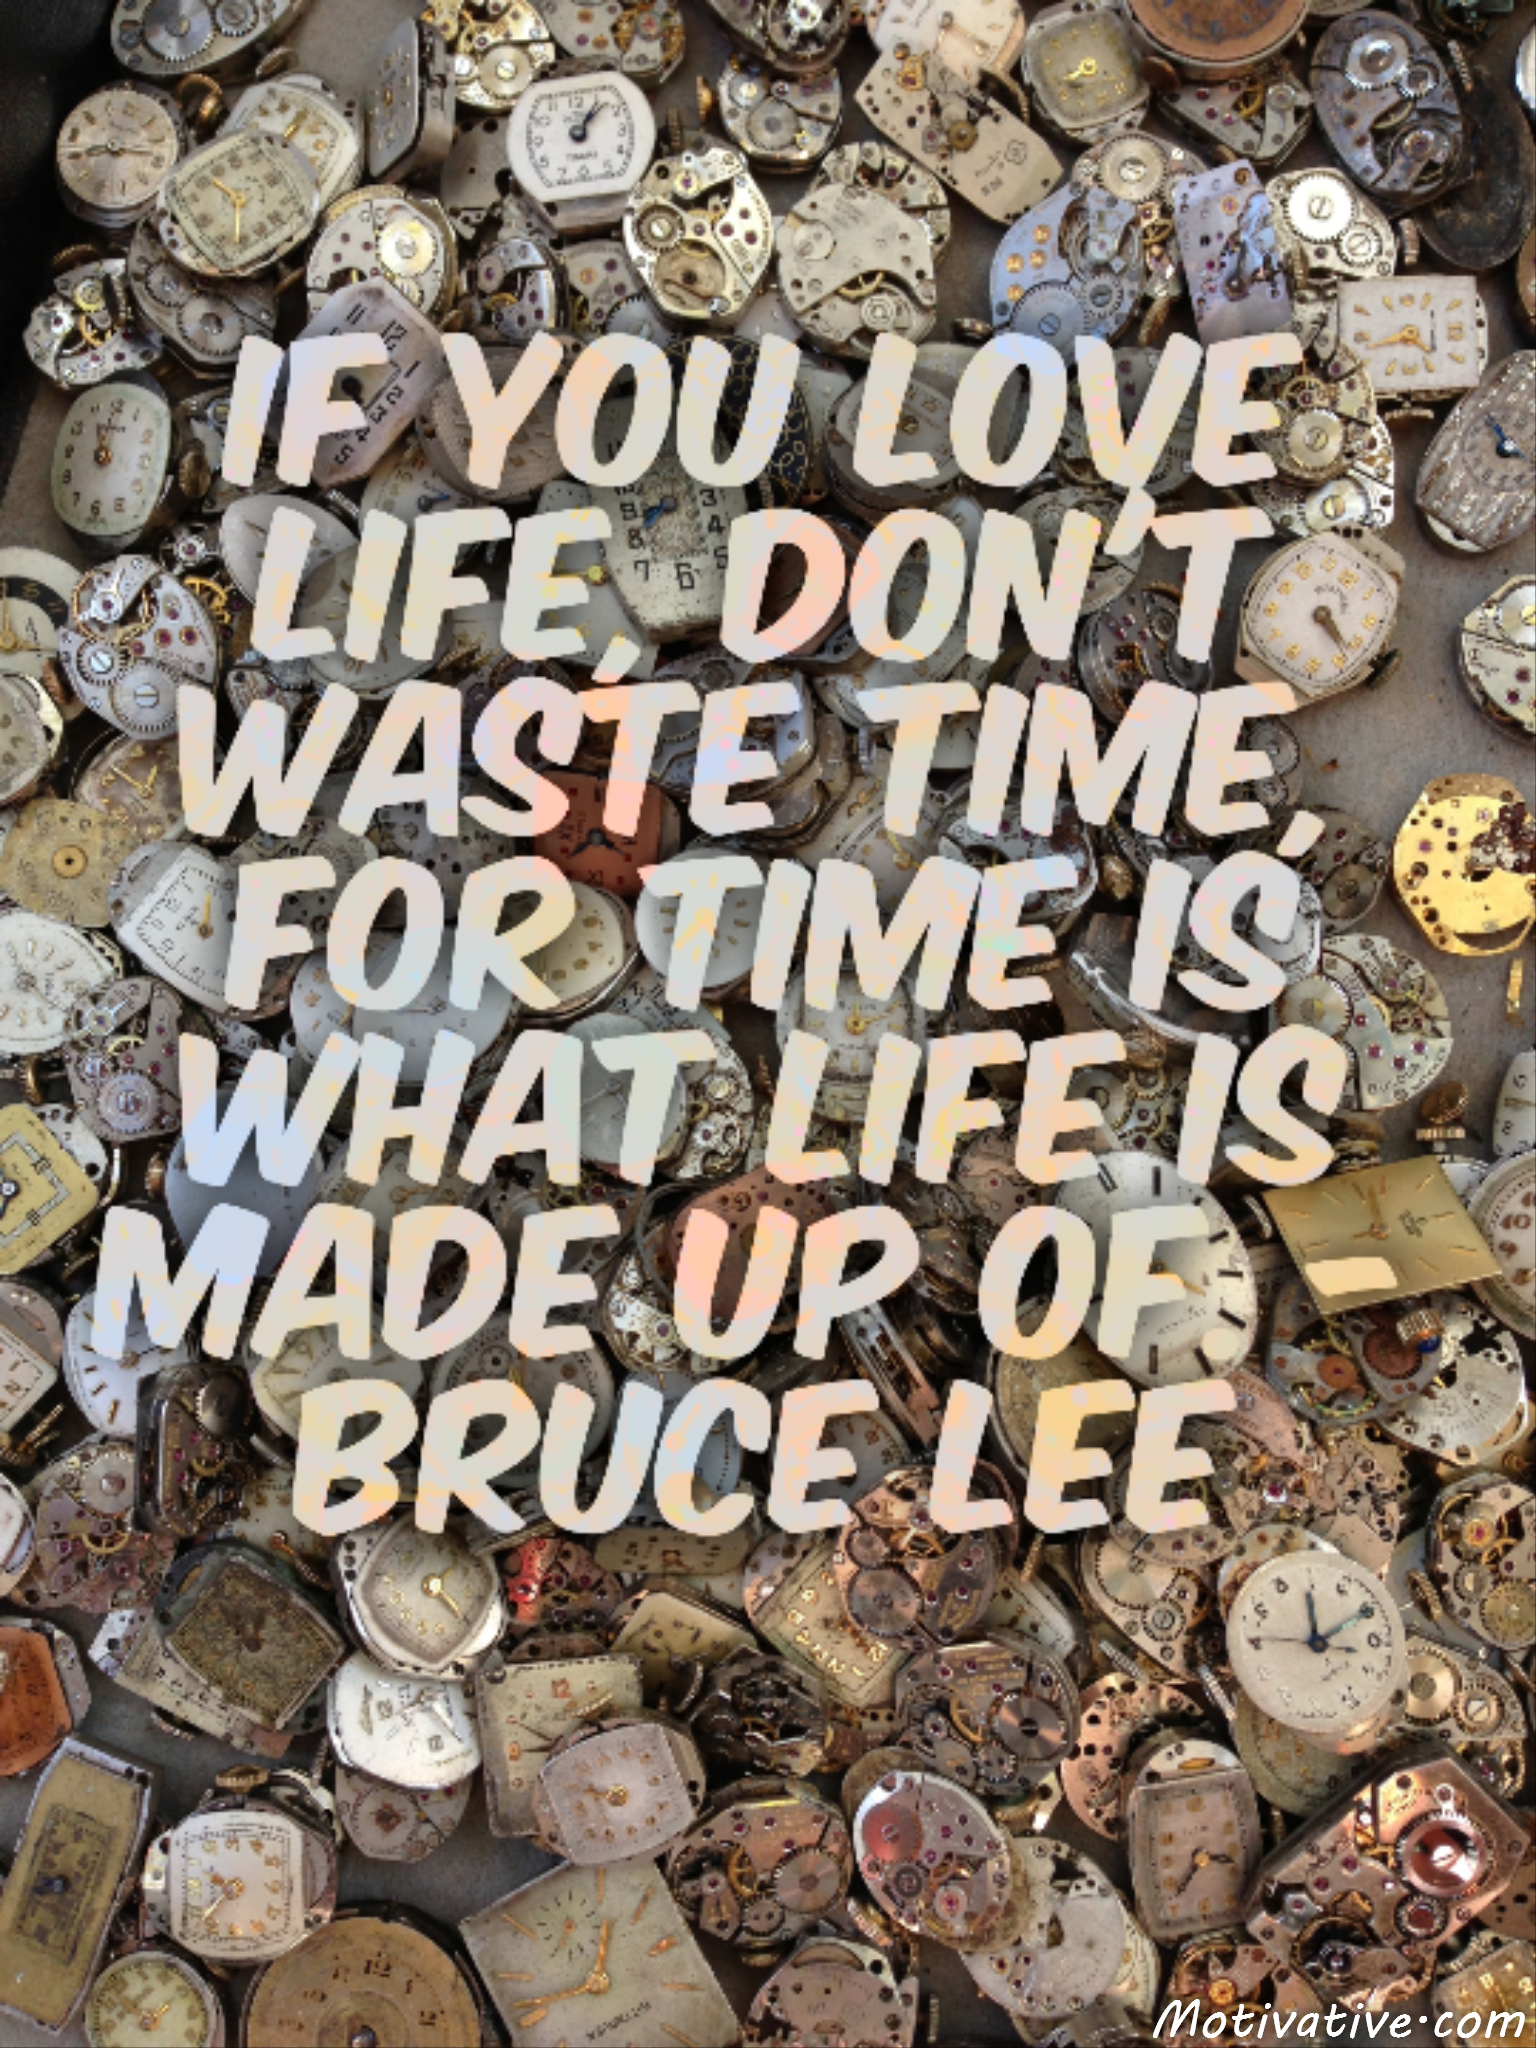 If you love life, don’t waste time, for time is what life is made up of. – Bruce Lee